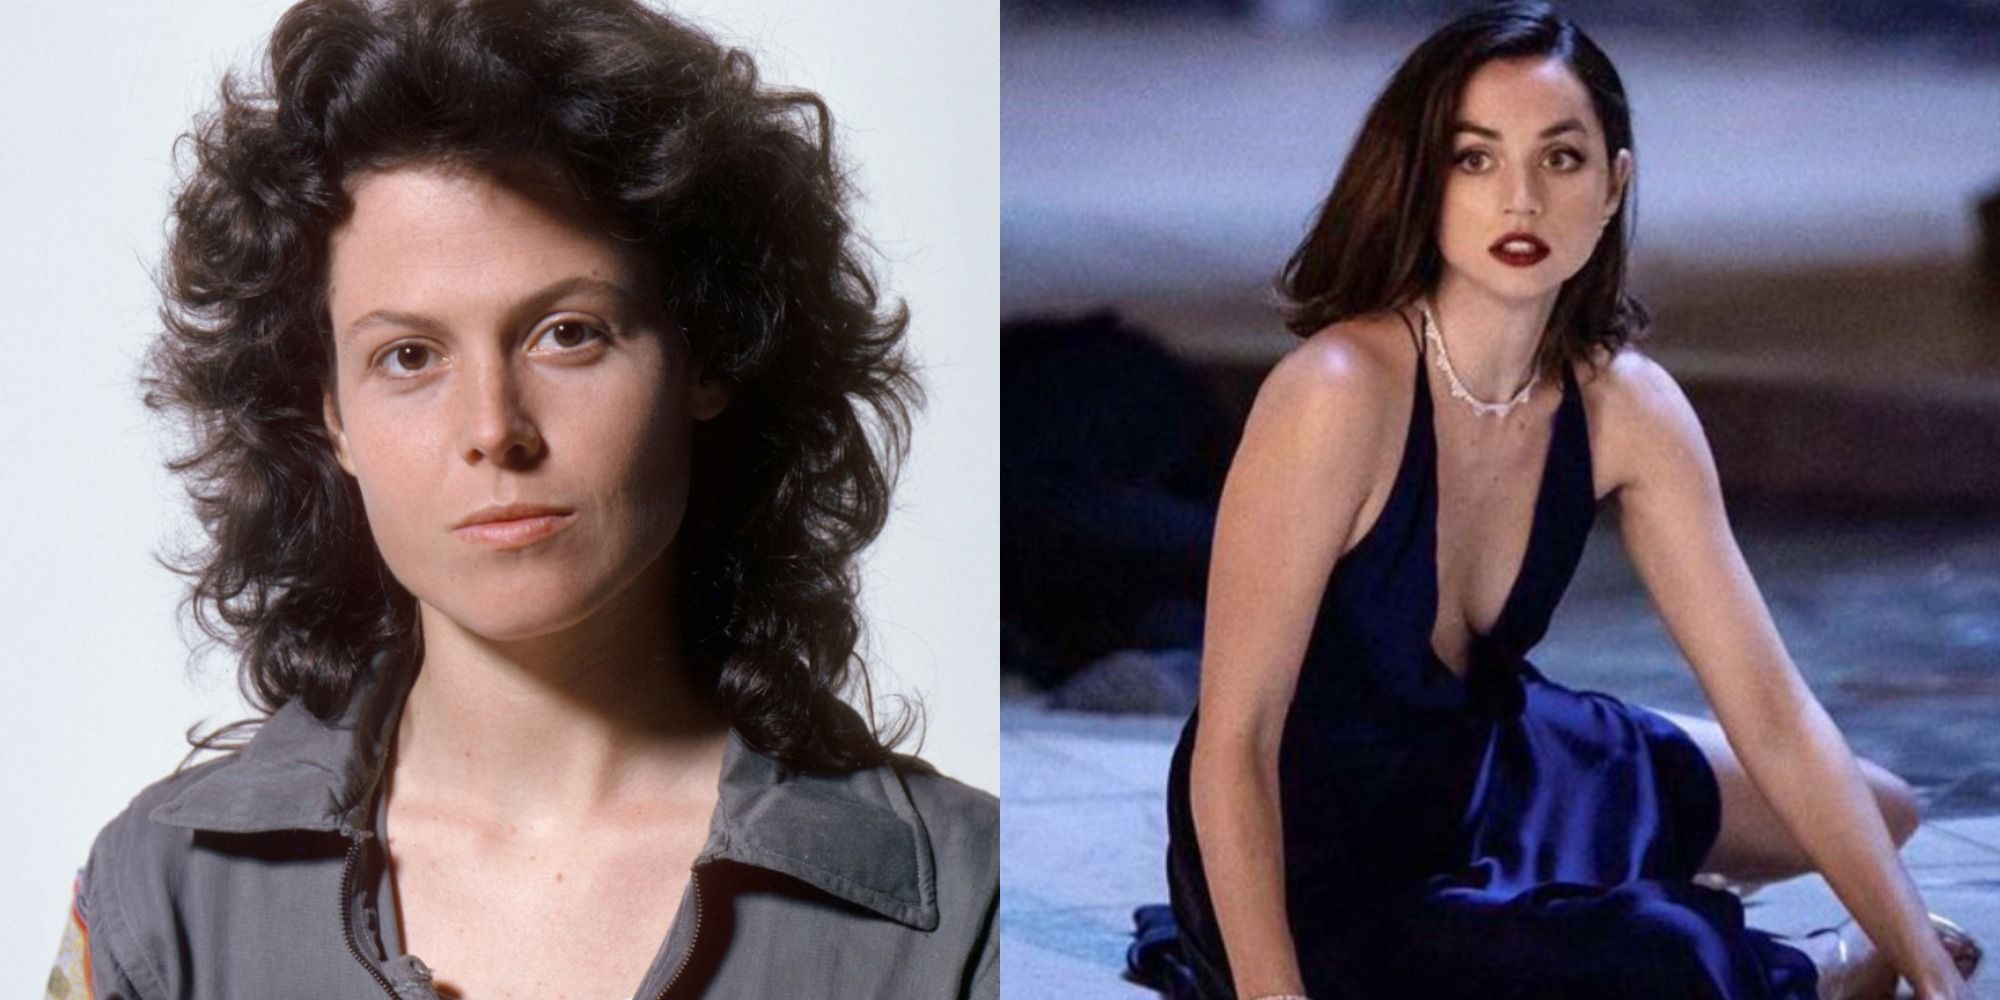 Split image showing Ripley in Alien and Paloma in No Time to Die